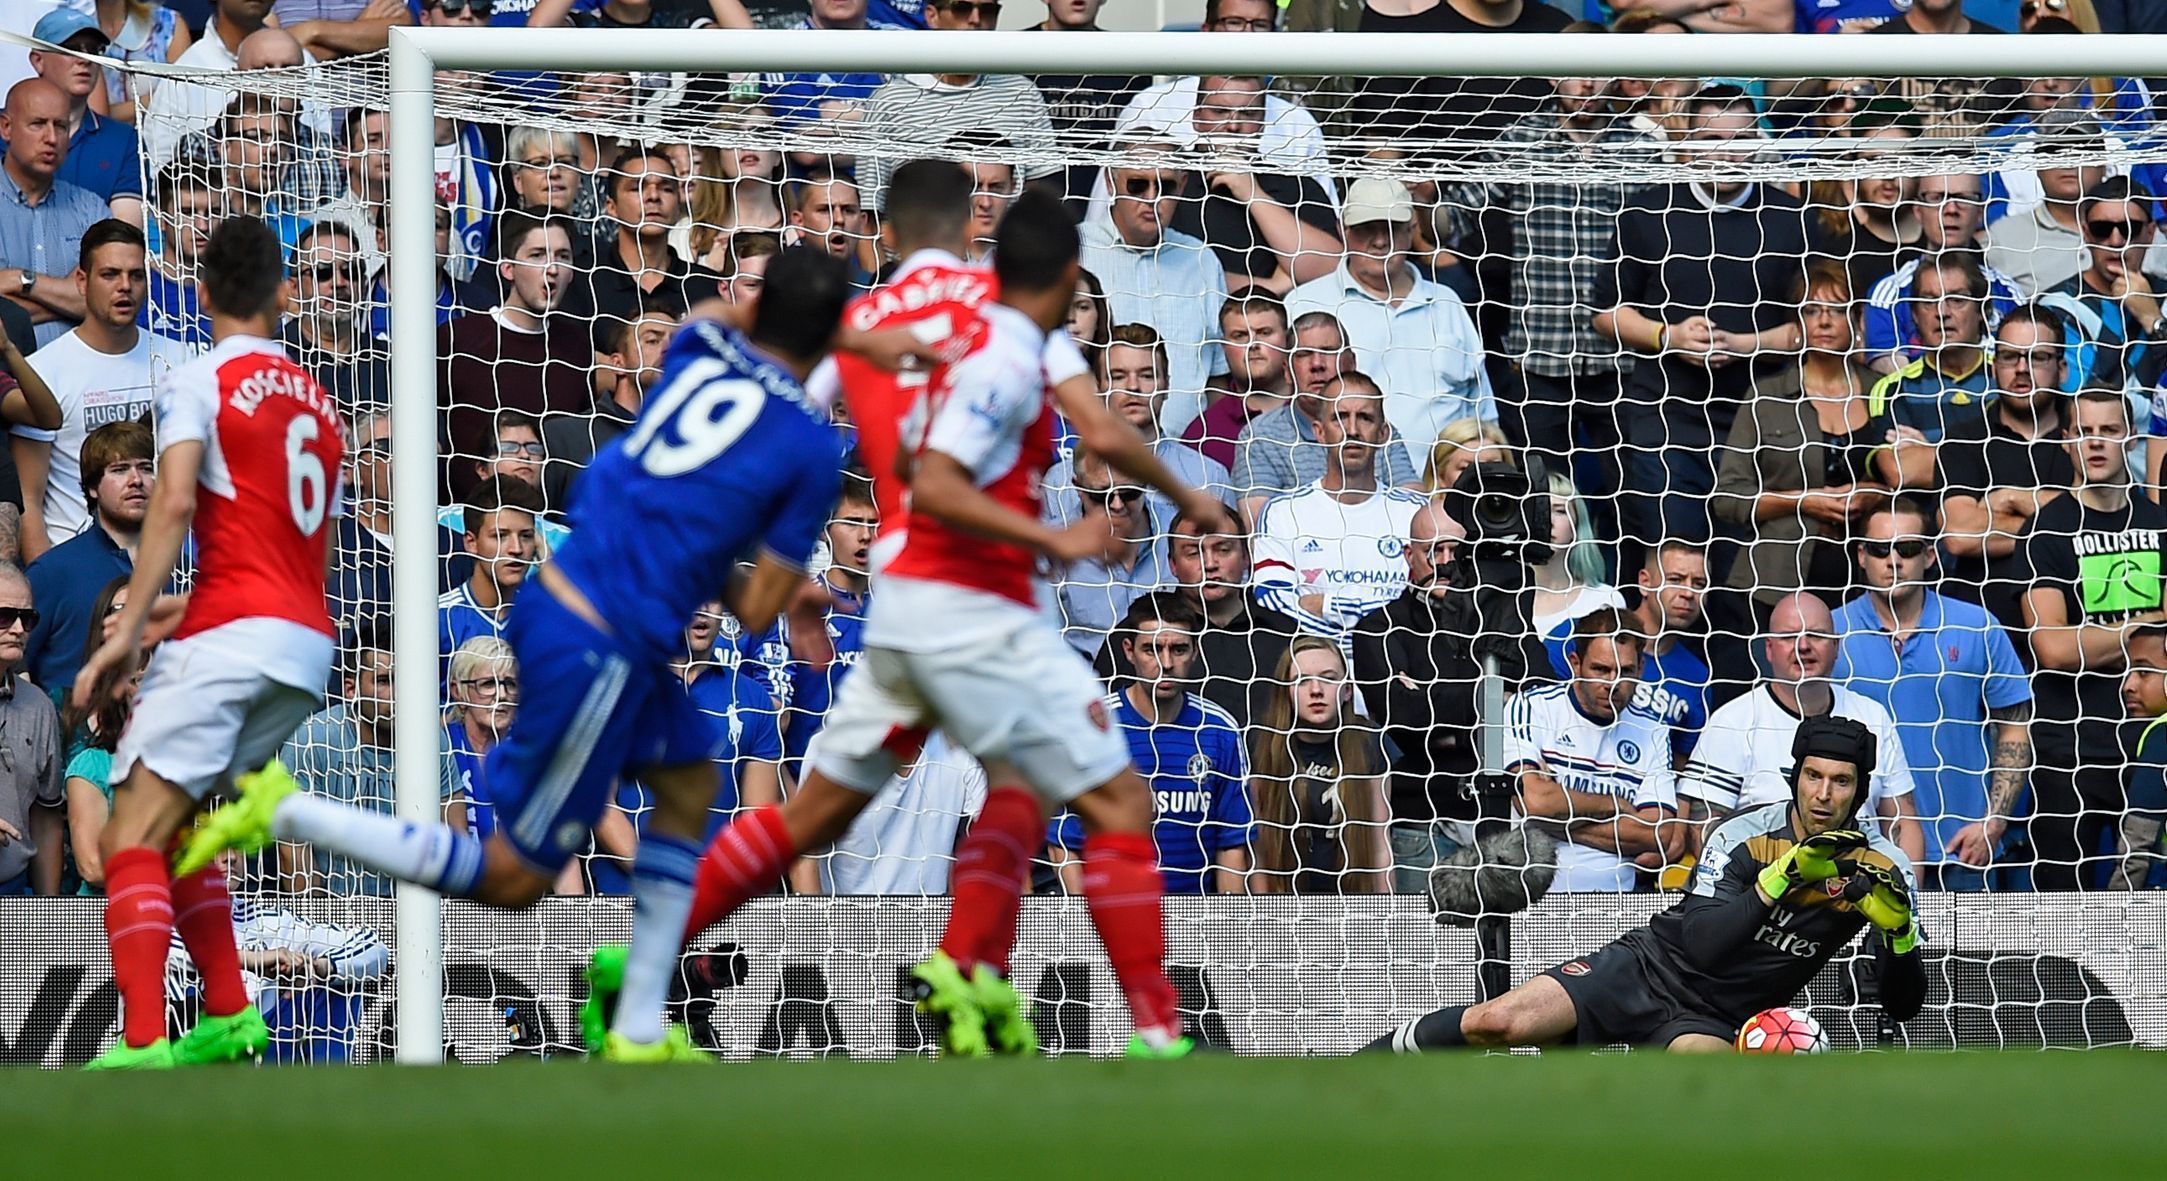 Arsenal's Petr Cech saves a shot from Chelsea's Diego Costa